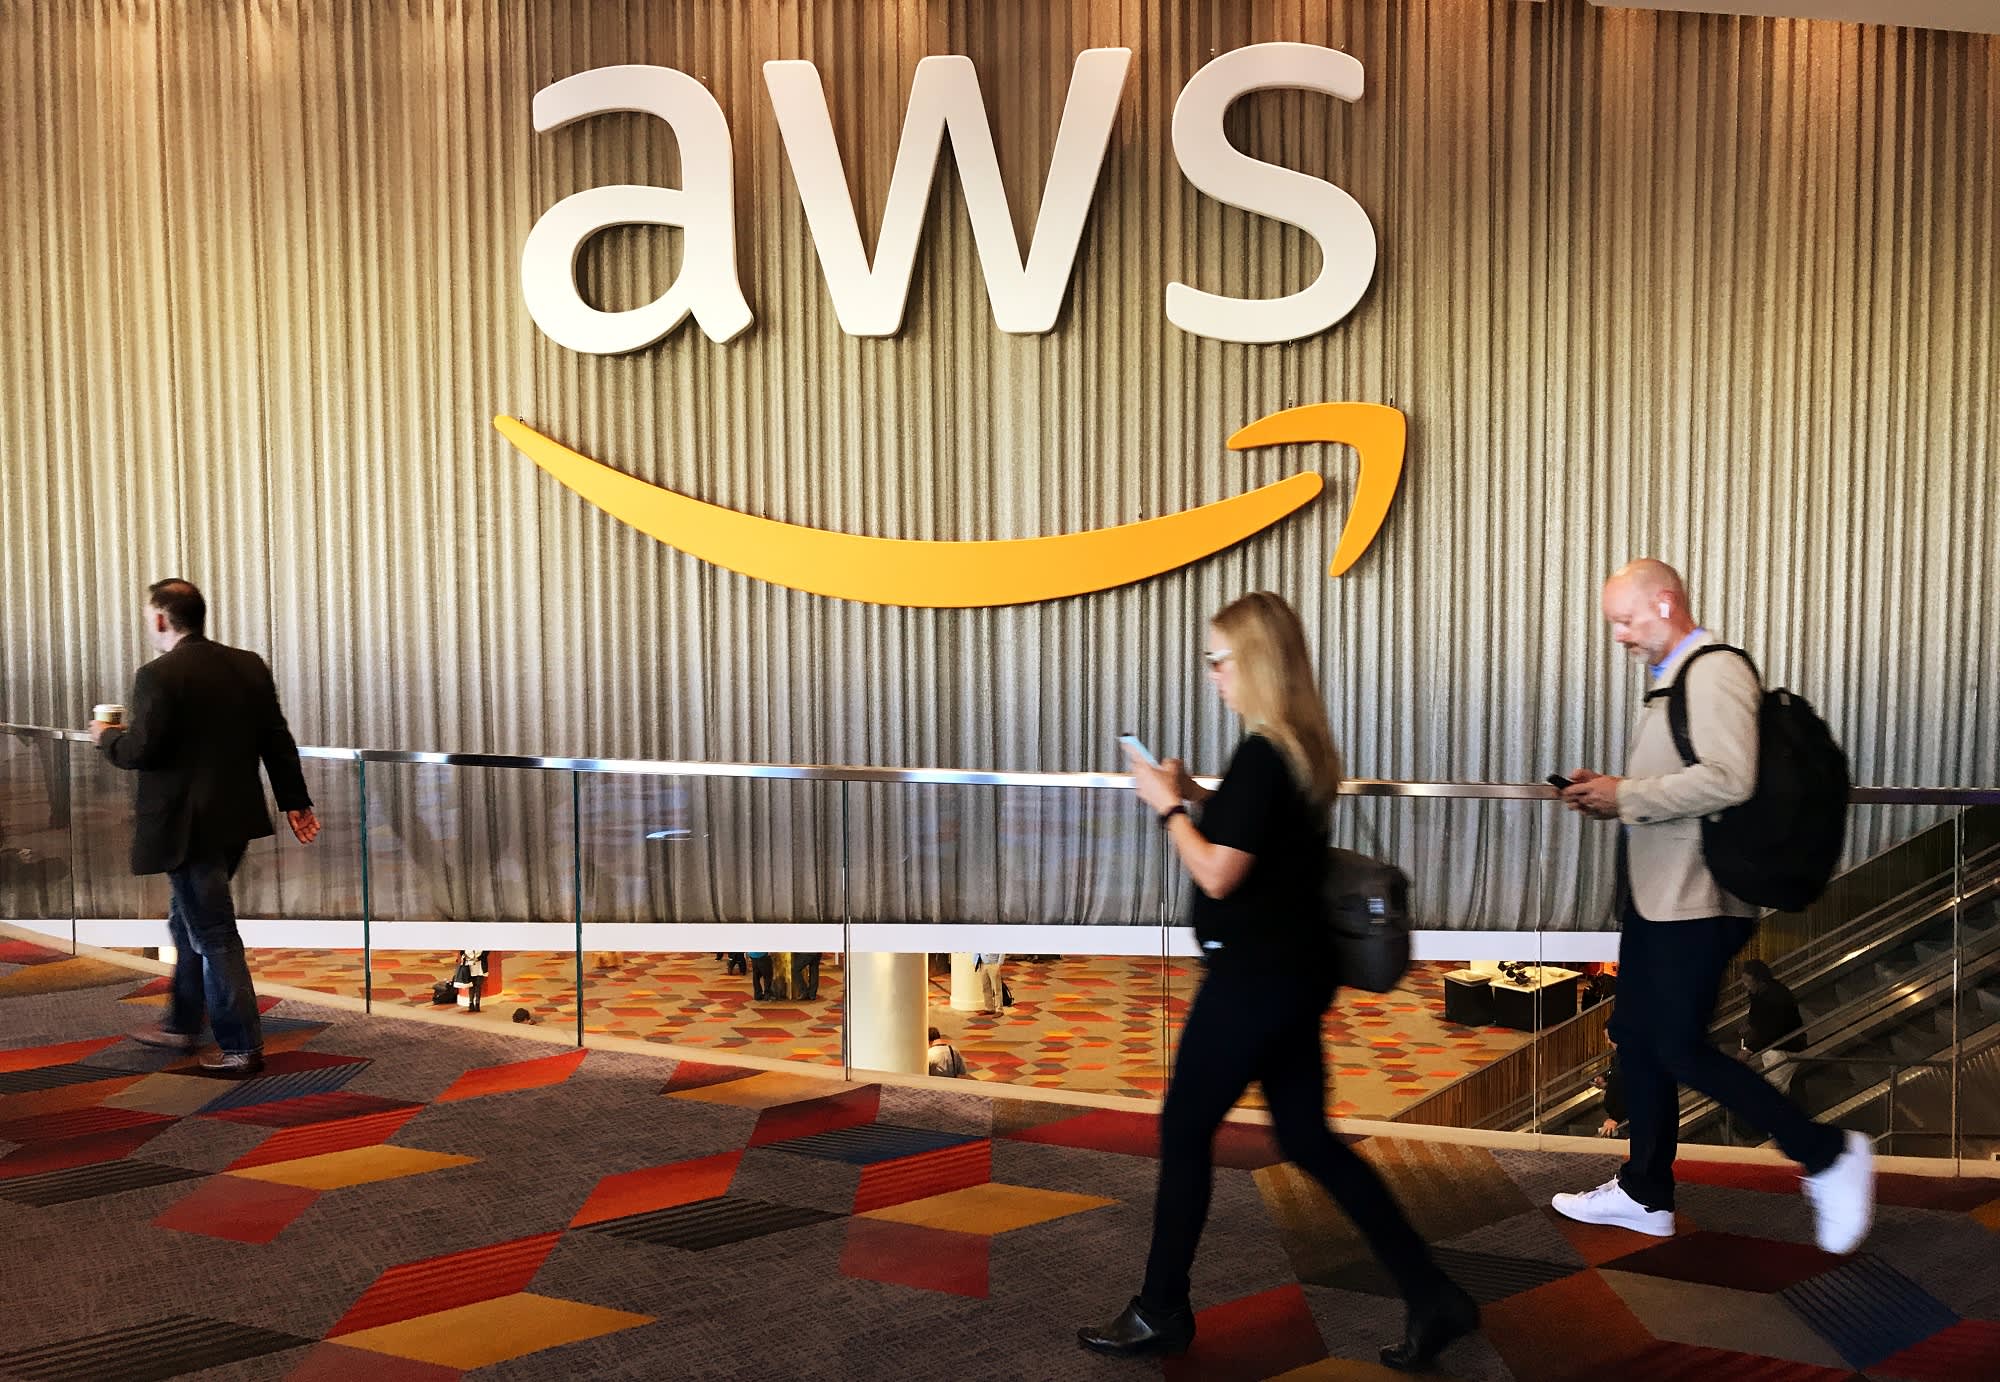 AWS outage: Amazon Web Services down for many websites and services